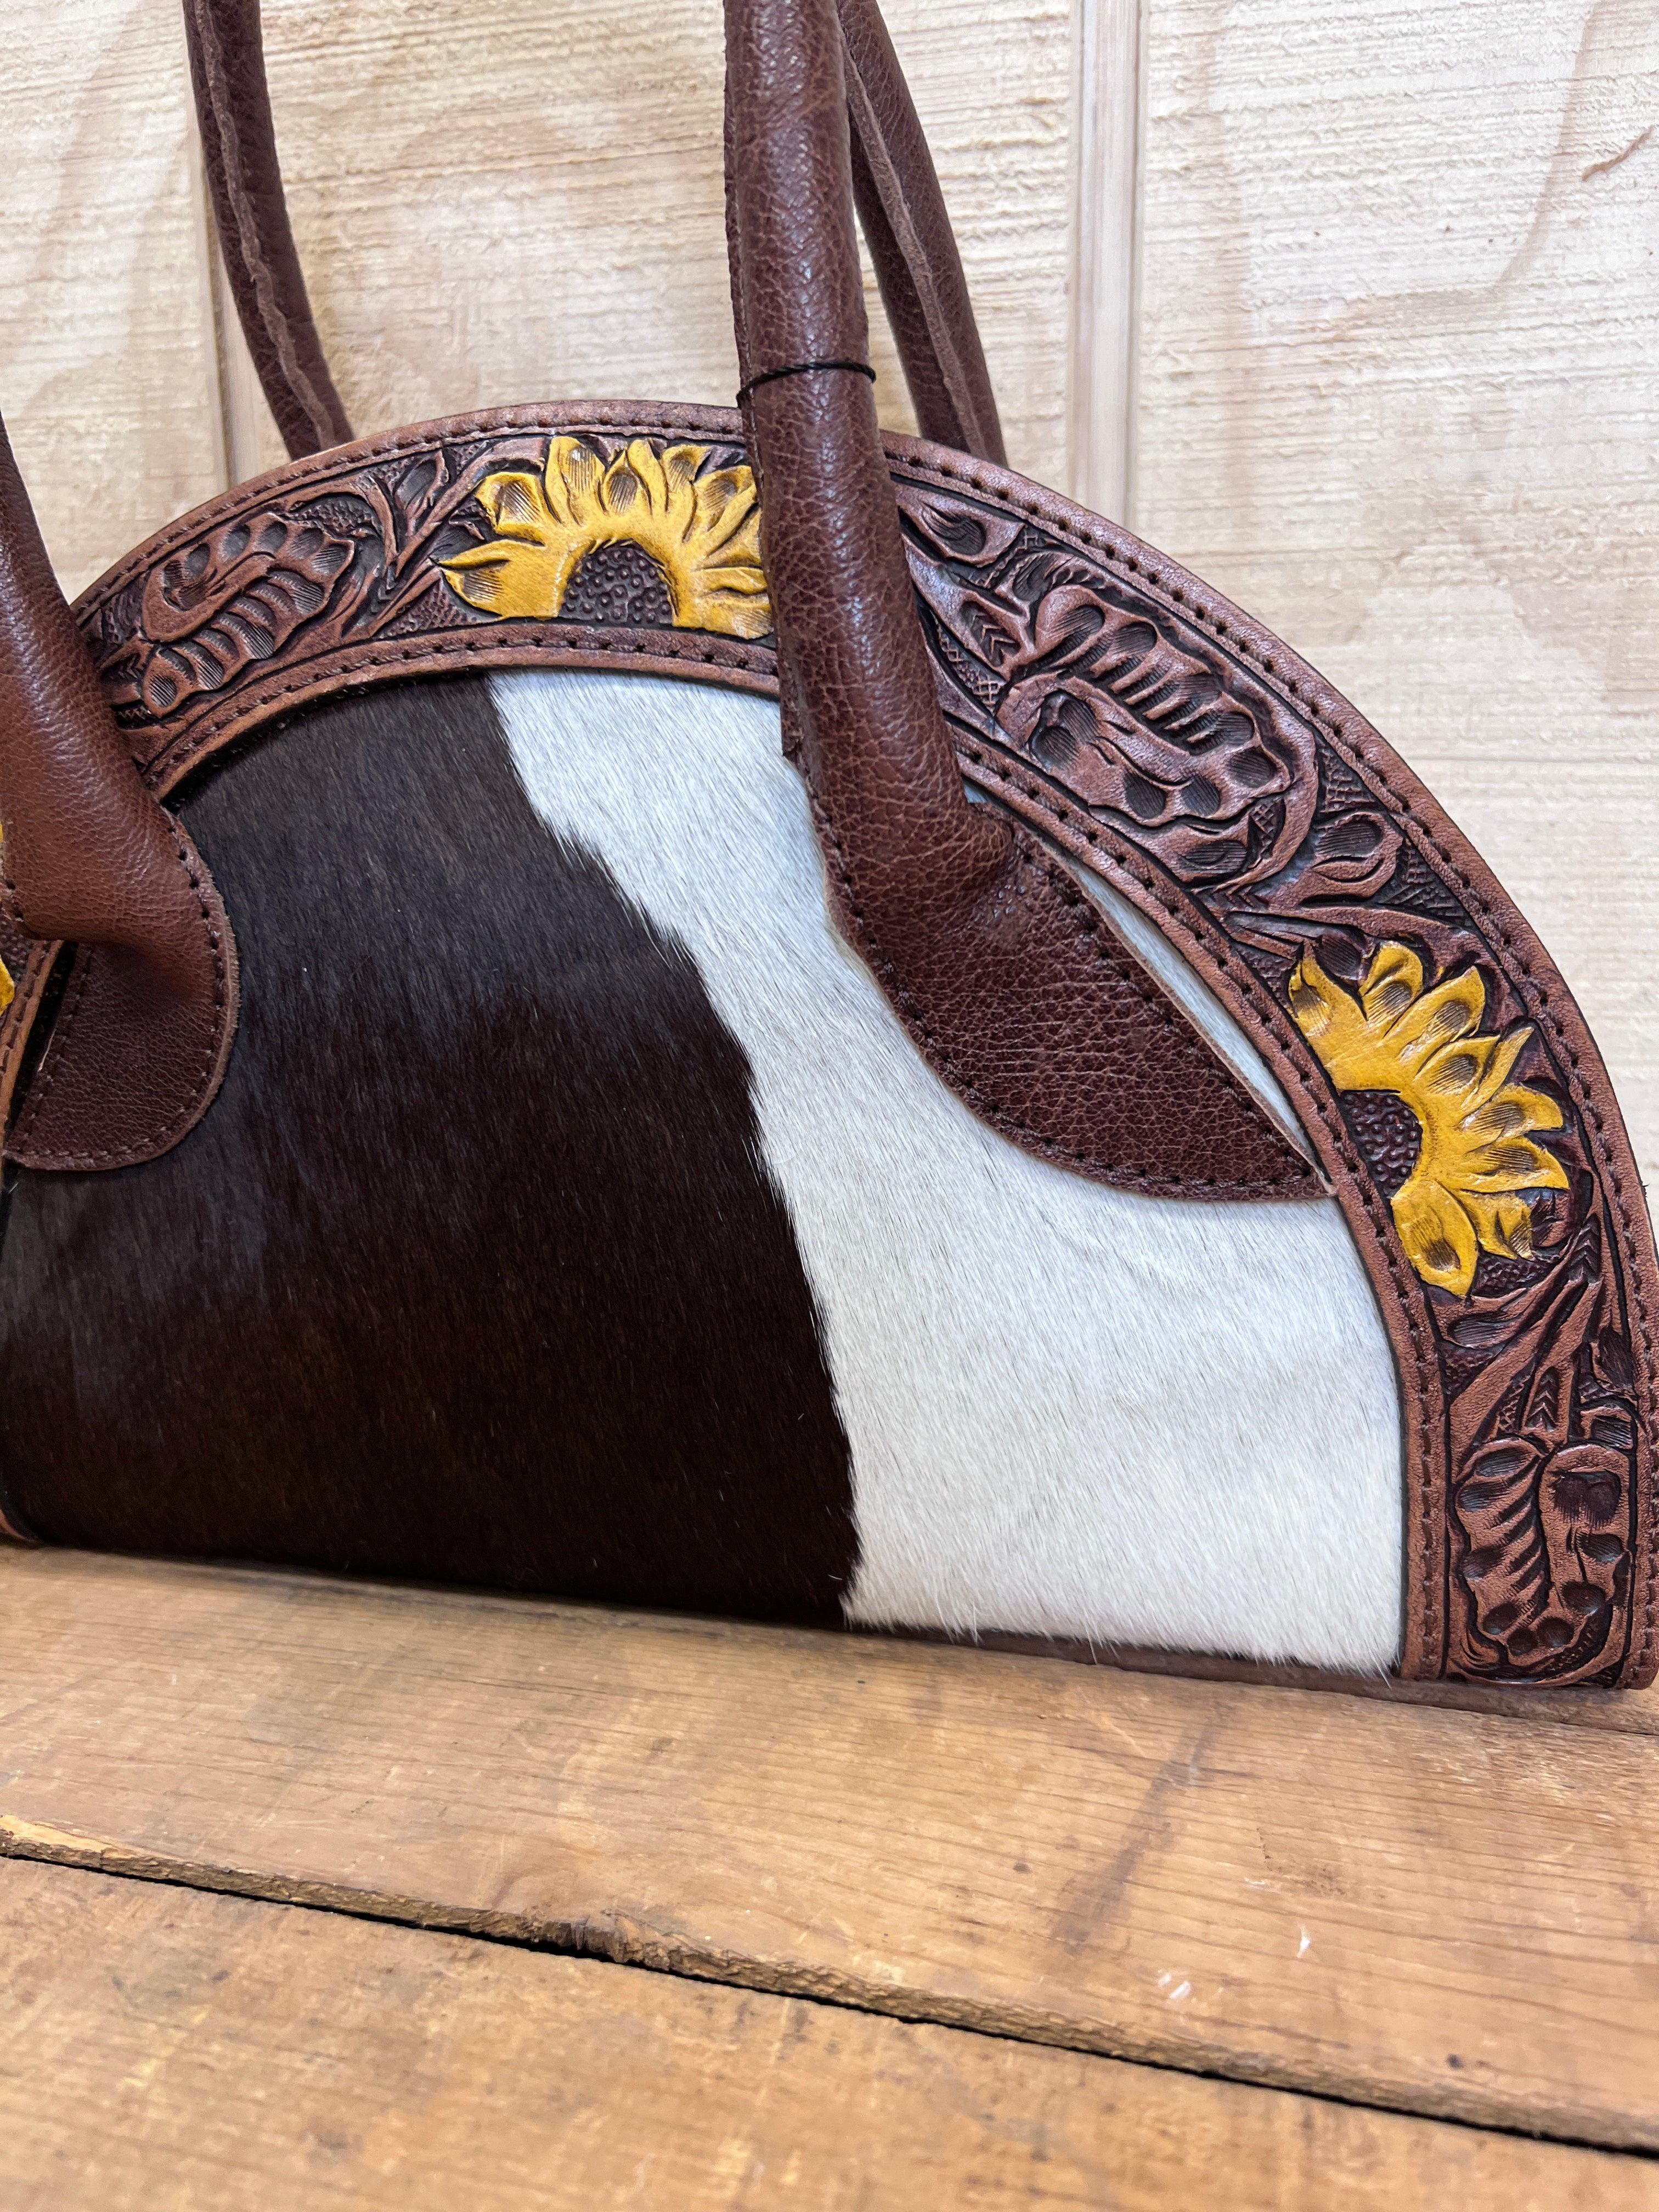 Texas Western Cowhide Bags And More Wholesale Products Buy With Free  Returns On | lupon.gov.ph